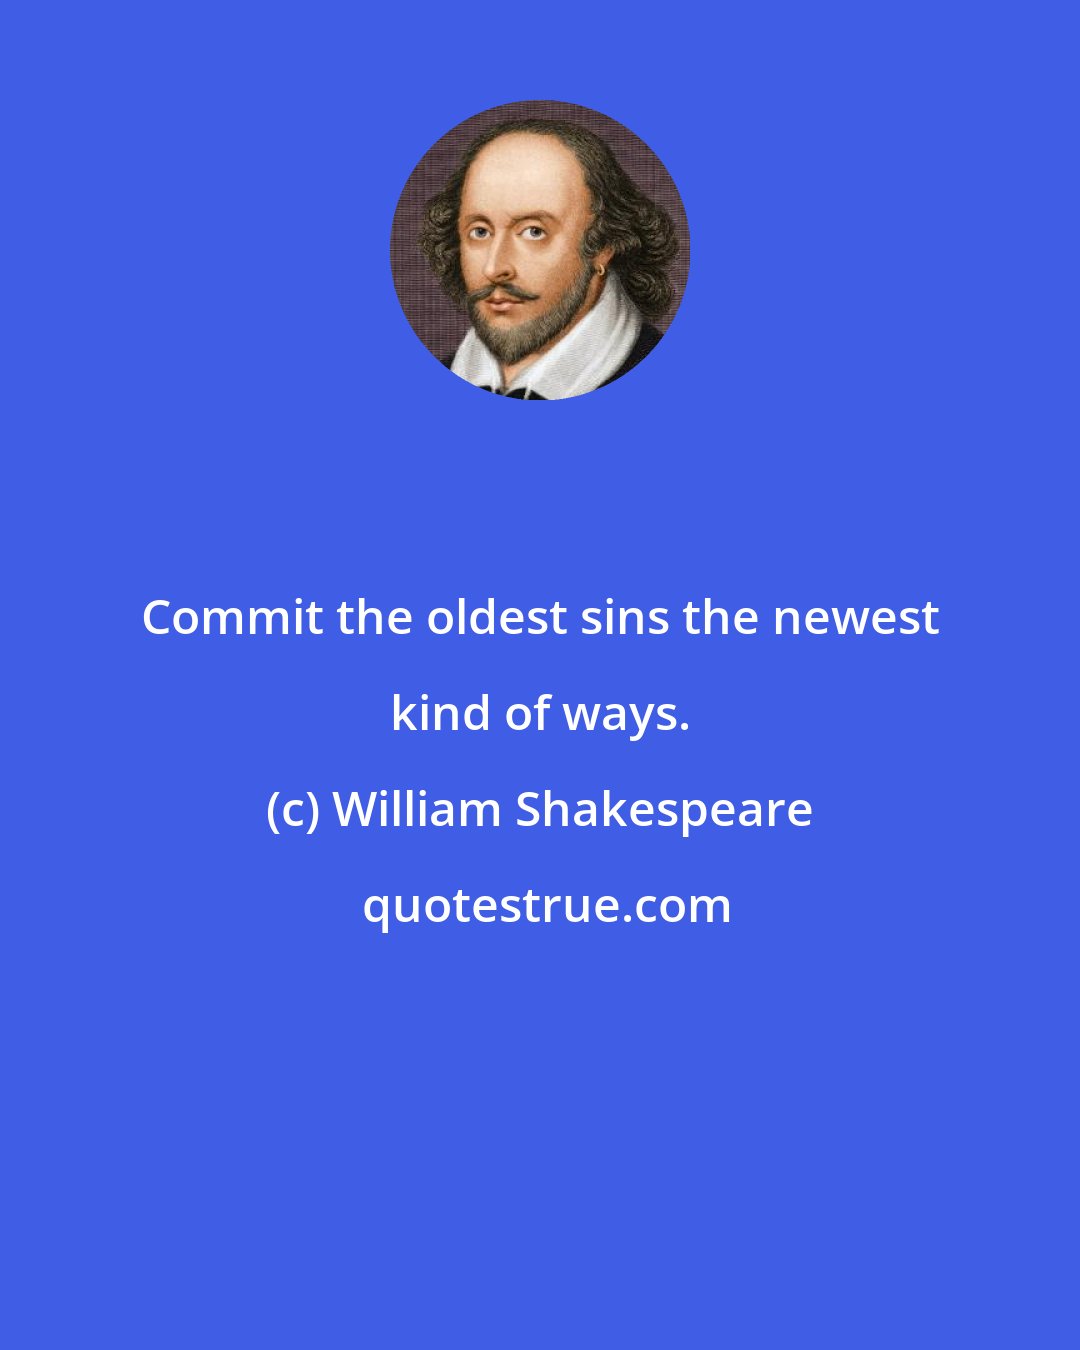 William Shakespeare: Commit the oldest sins the newest kind of ways.